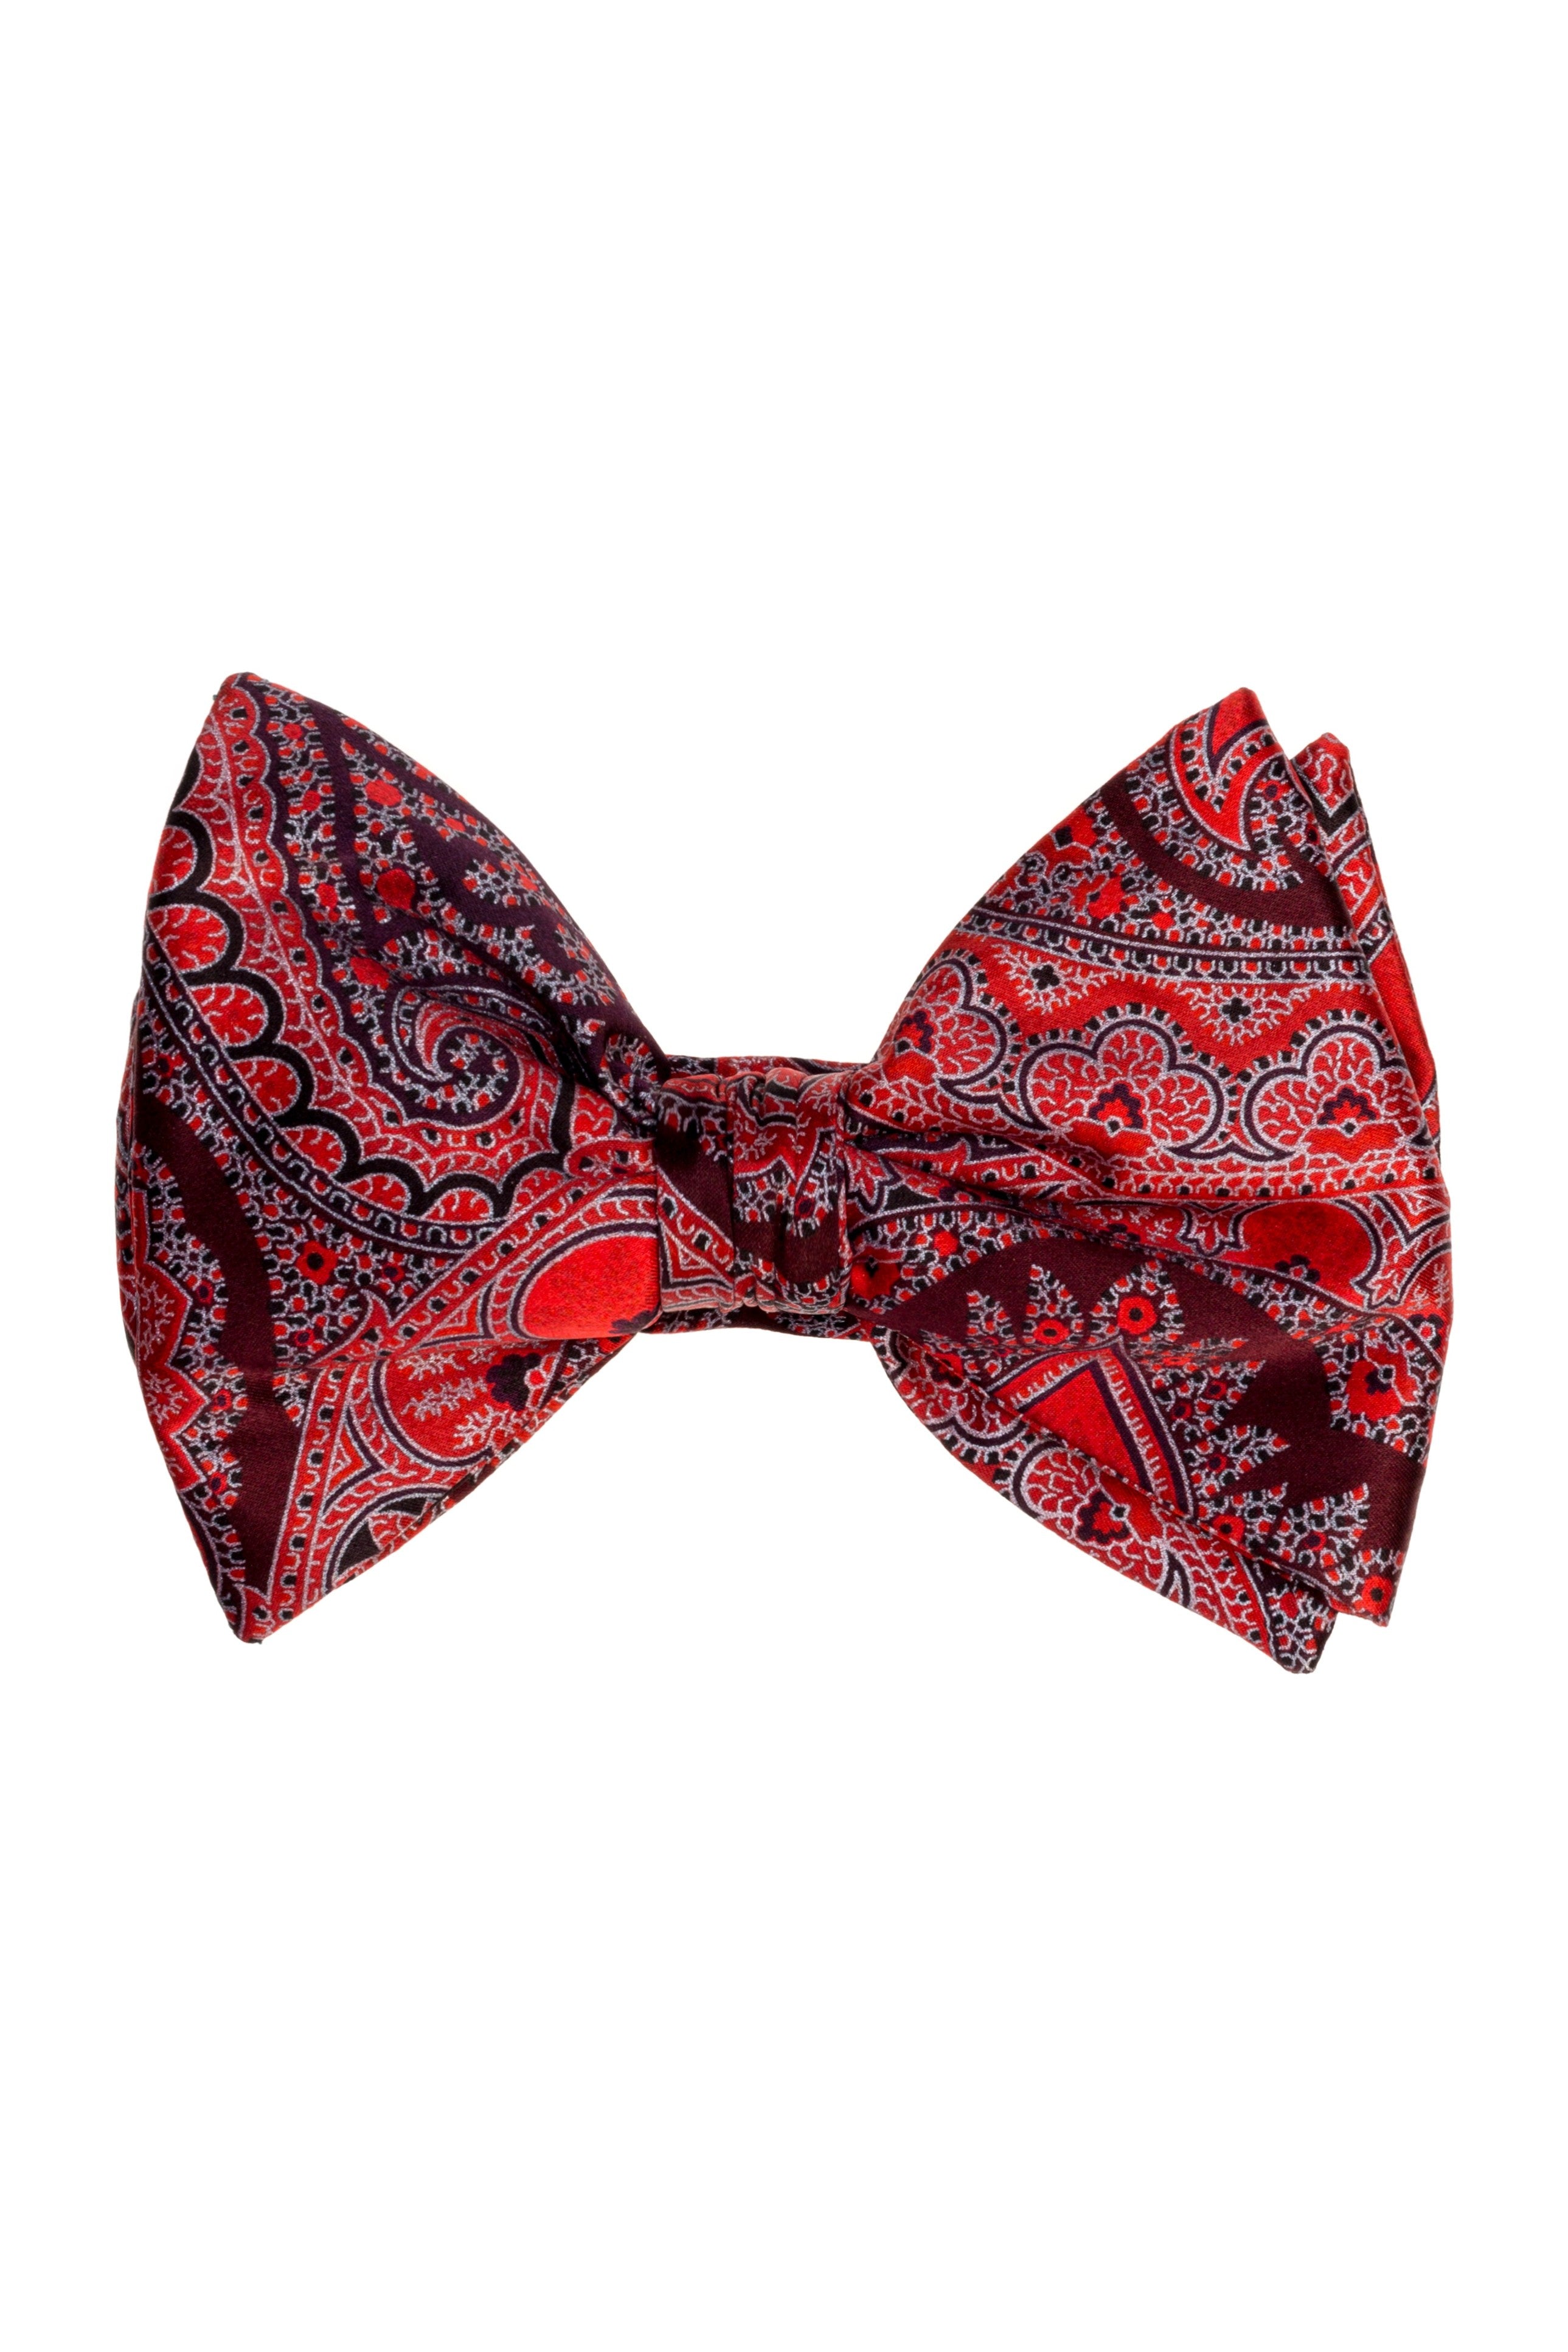 Cadillac Bow-Tie - Traditional Hand Print